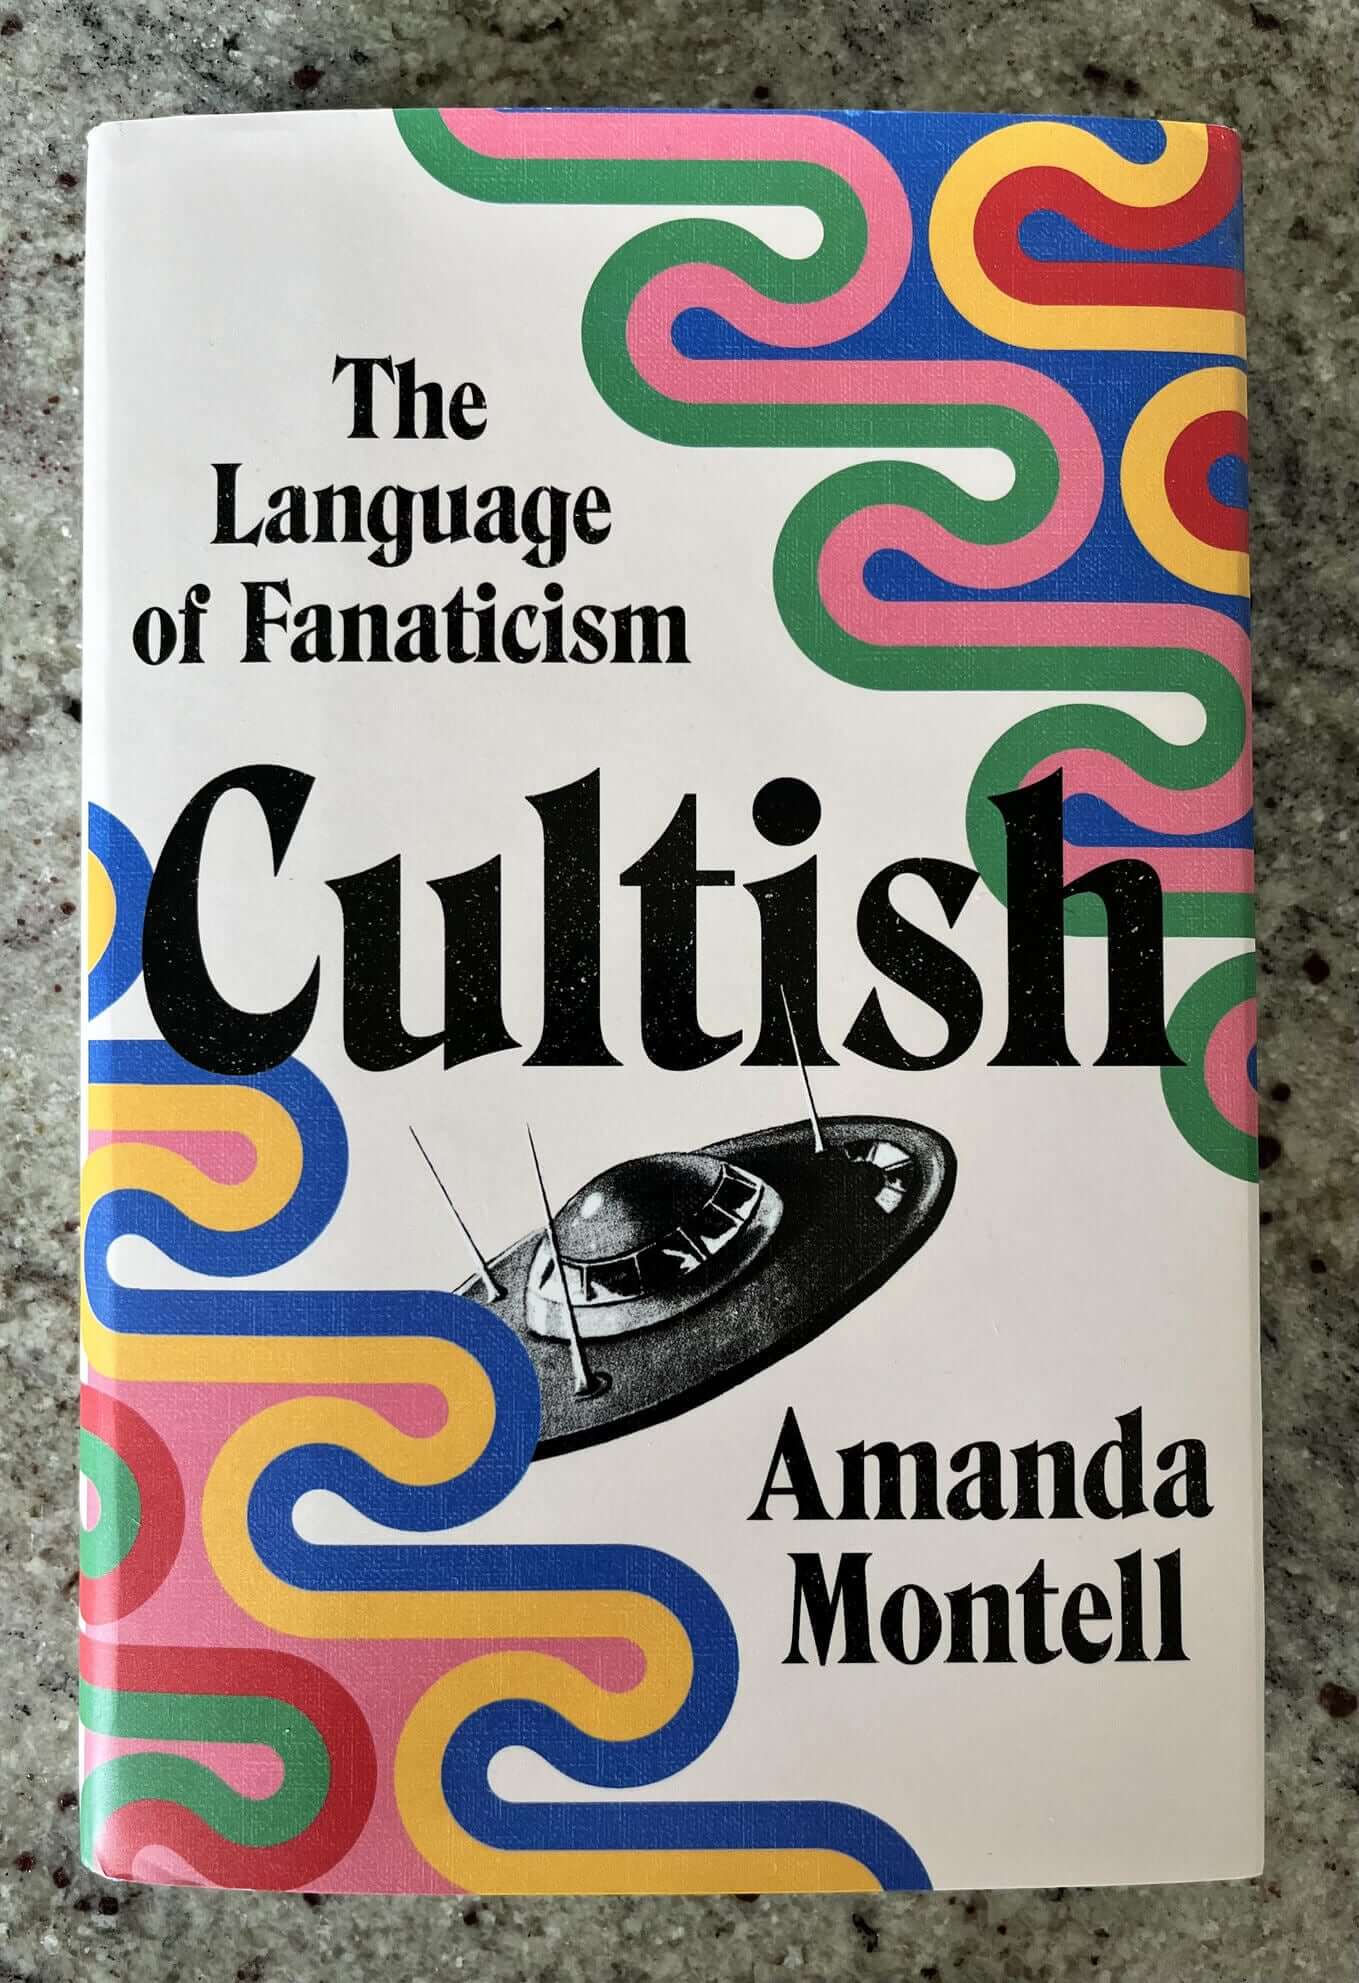 “Cultish: The Language of Fanaticism” by Amanda Montell.